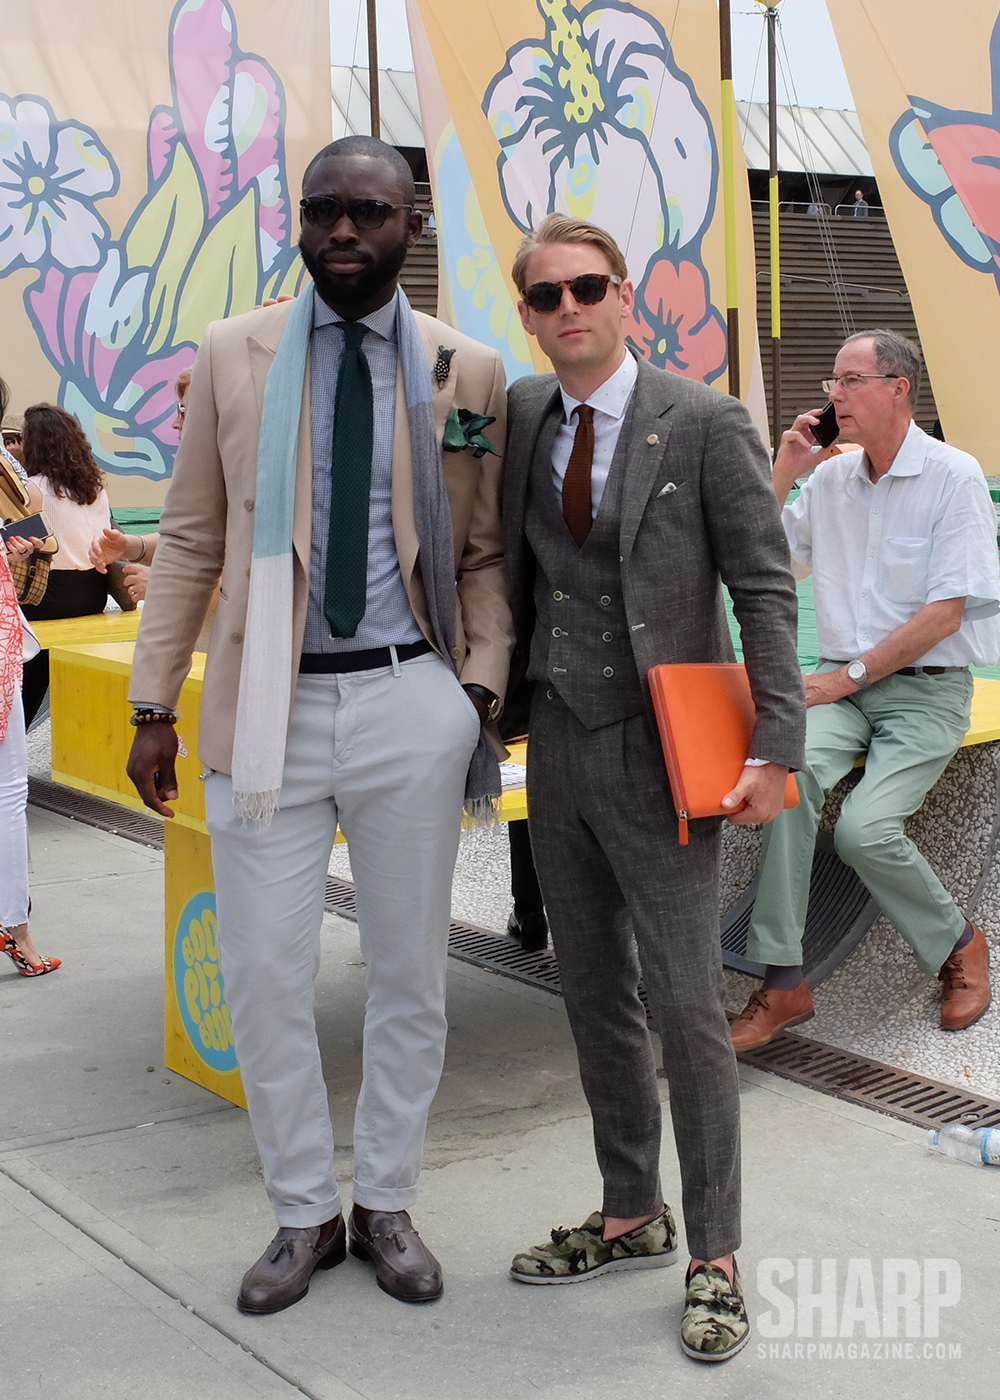 Yeezy Who? Traditional Tailoring Makes a Stand at Pitti Uomo - Sharp ...